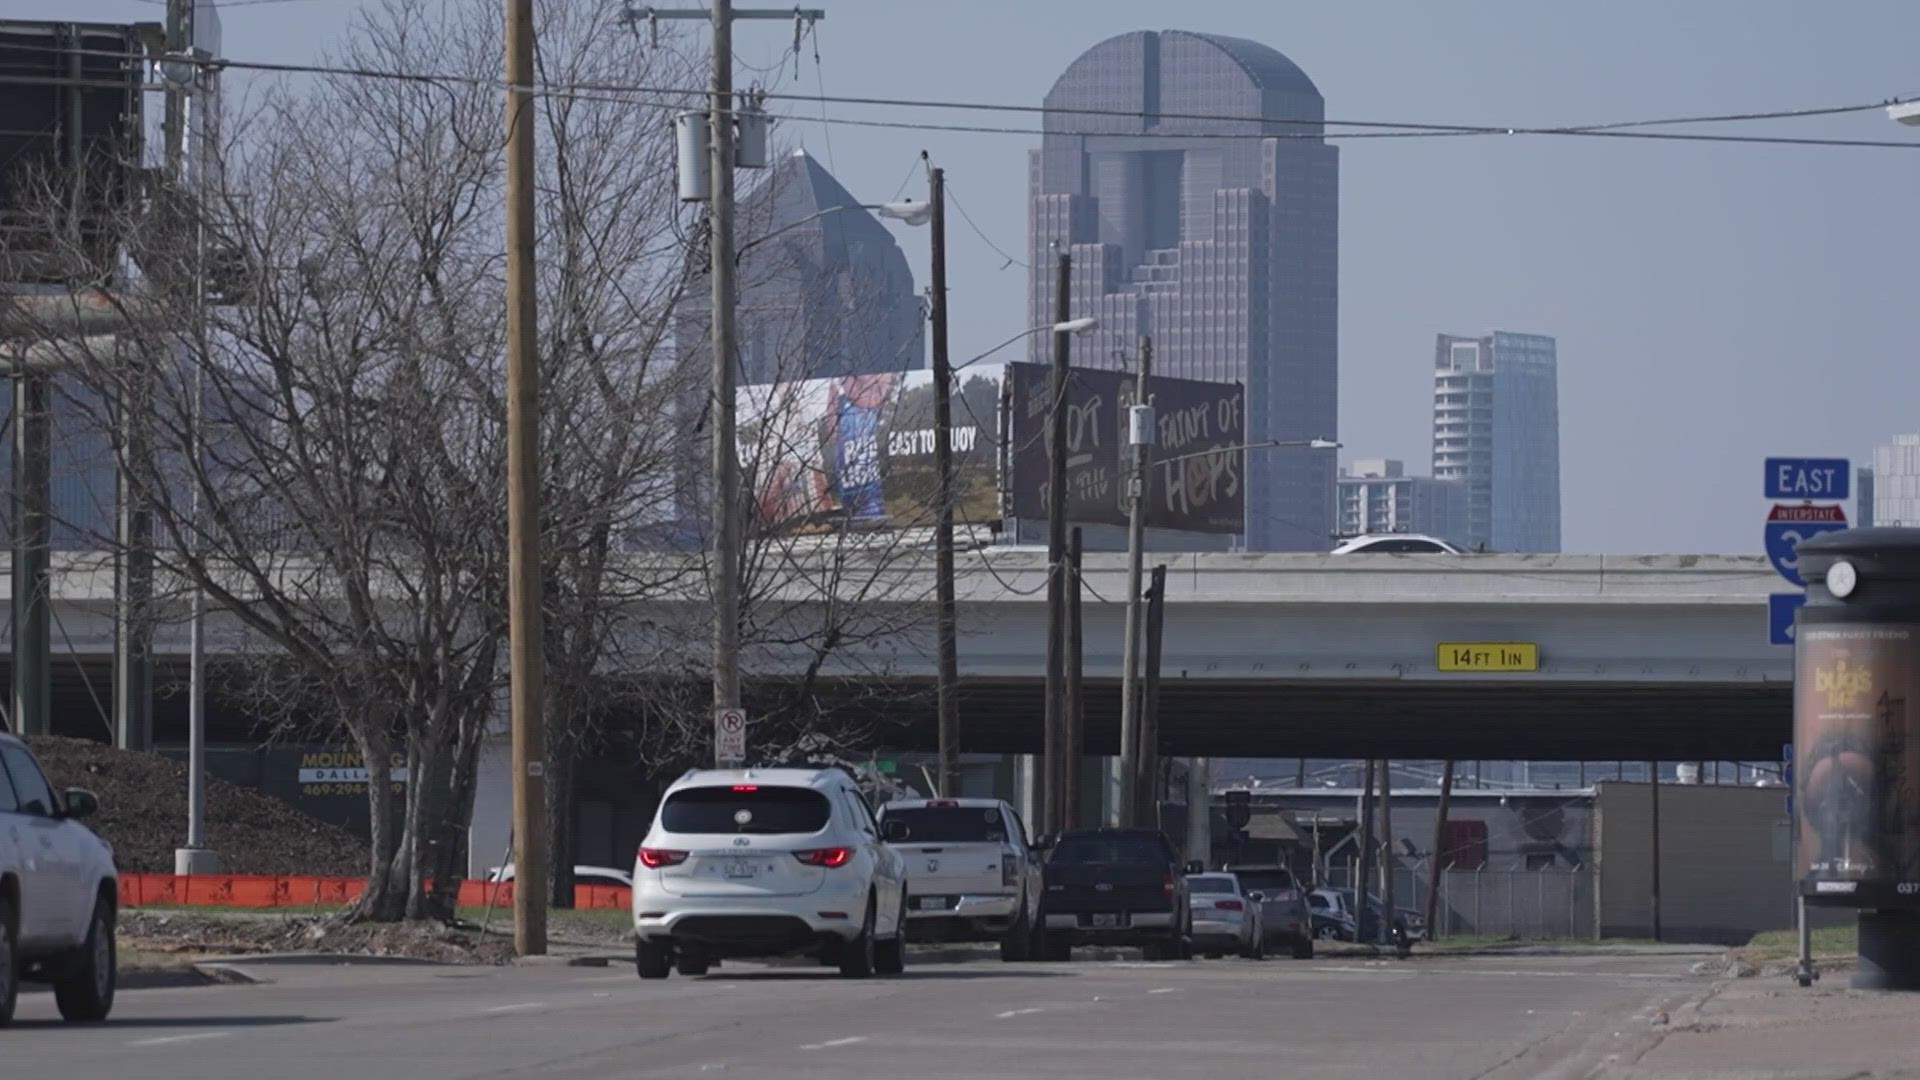 North Central Texas Council of Governments is hosting a series of community meeting for plans to connect Fair Park through Deep Ellum to Downtown Dallas.